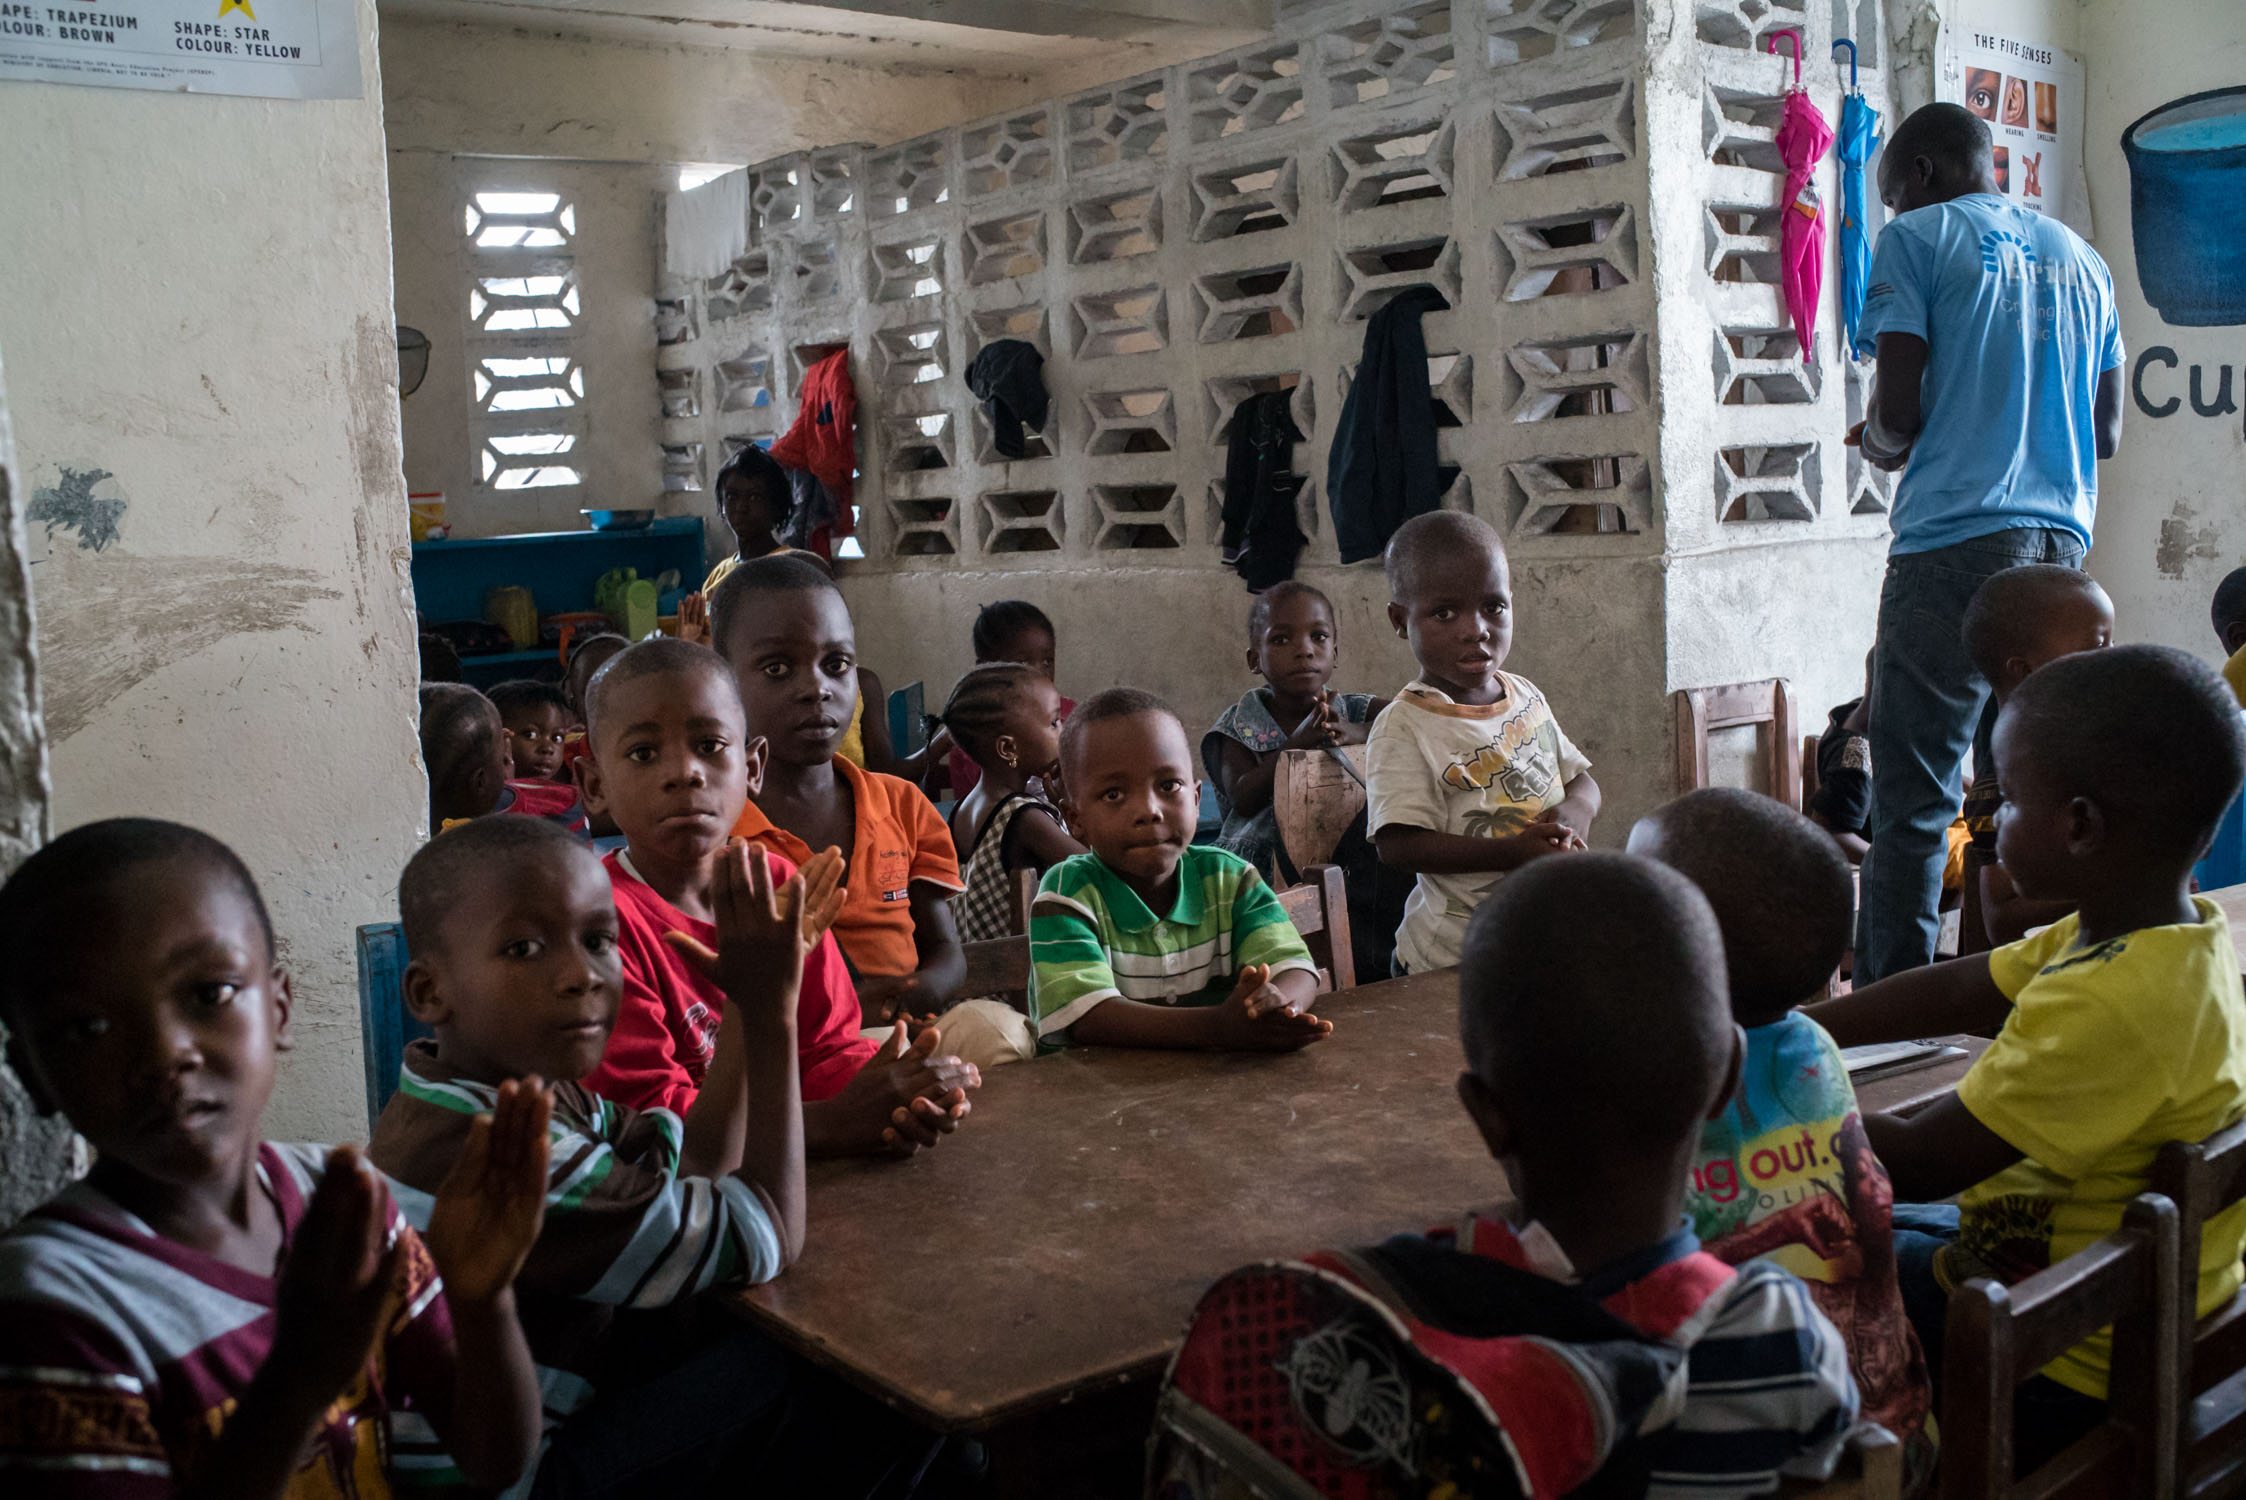  Children attend class in a recently opened and overcrowded Bridge school in inner city Monrovia. September 23, 2016. Monrovia, Liberia. 